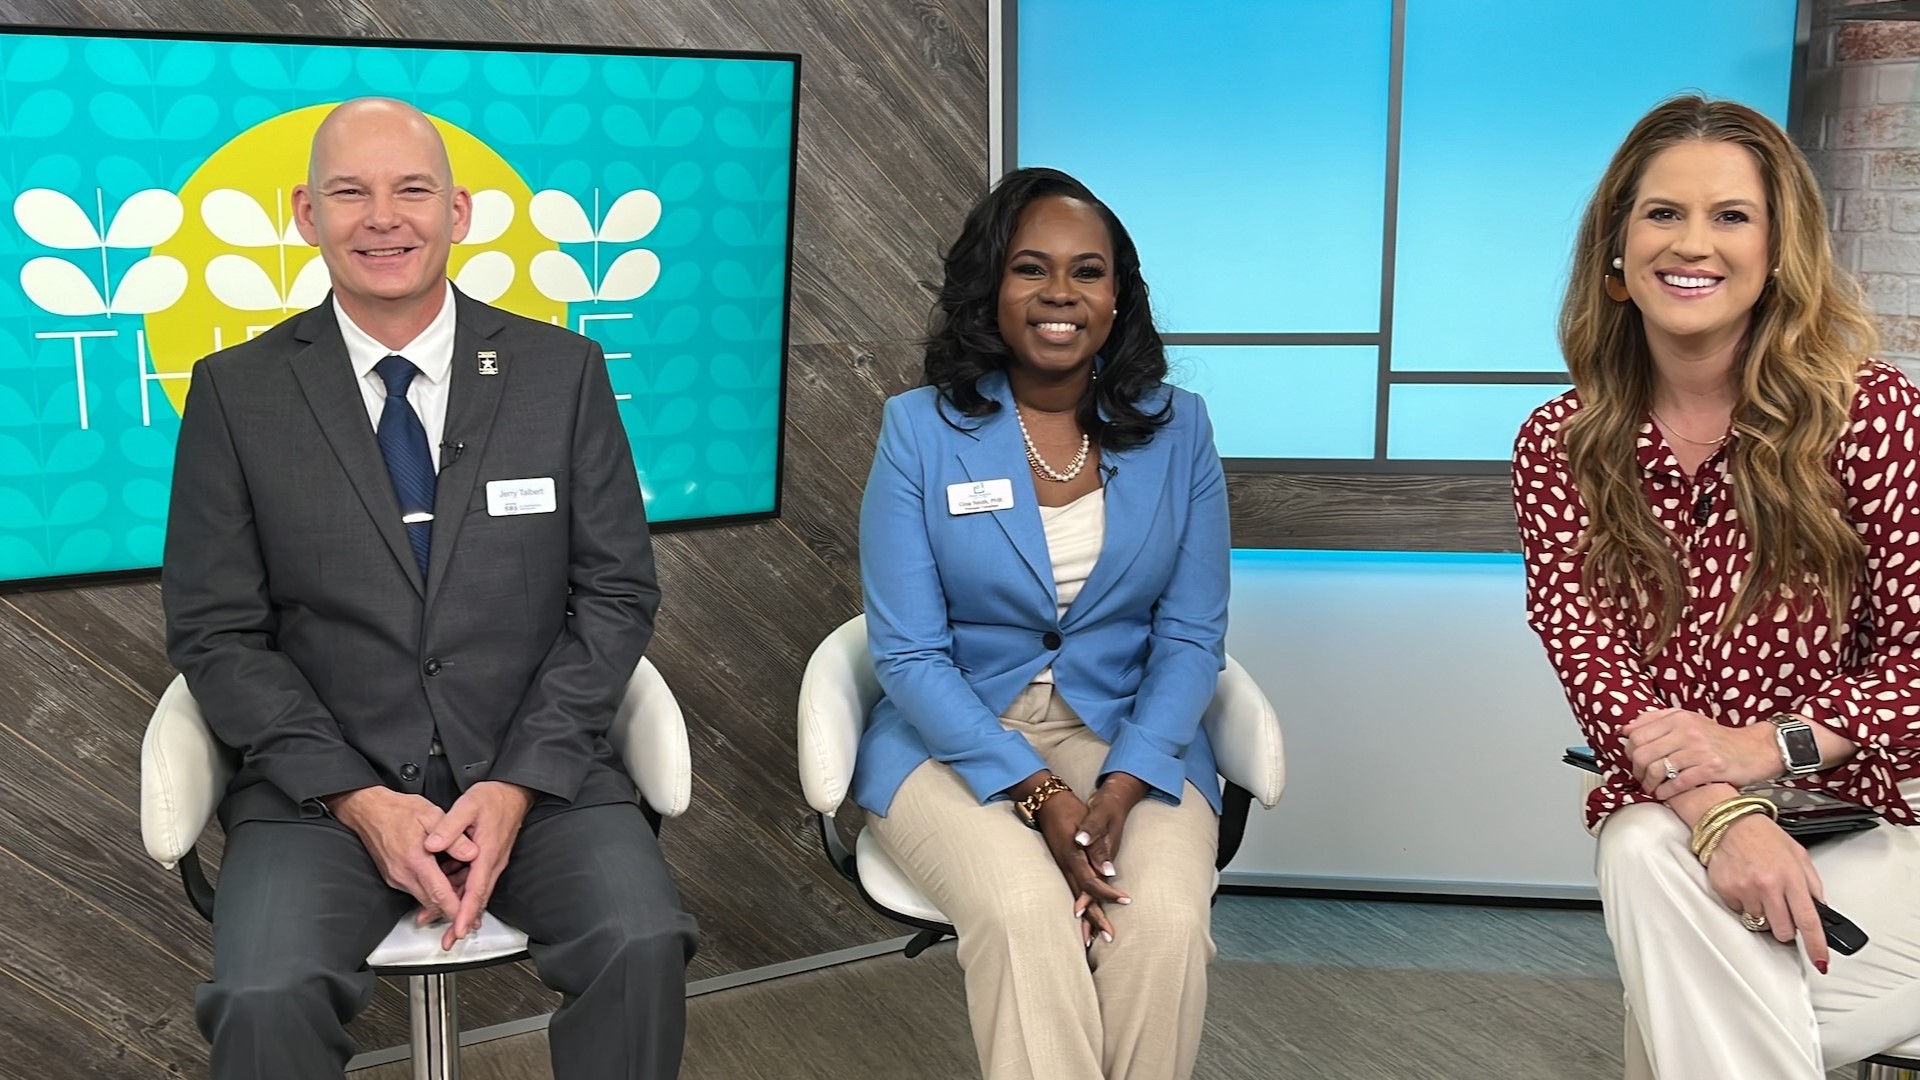 Jerry Talbert and Gina Smith explains the T.H.R.I.V.E program where small business owners get executive-level training, and long-term strategies.